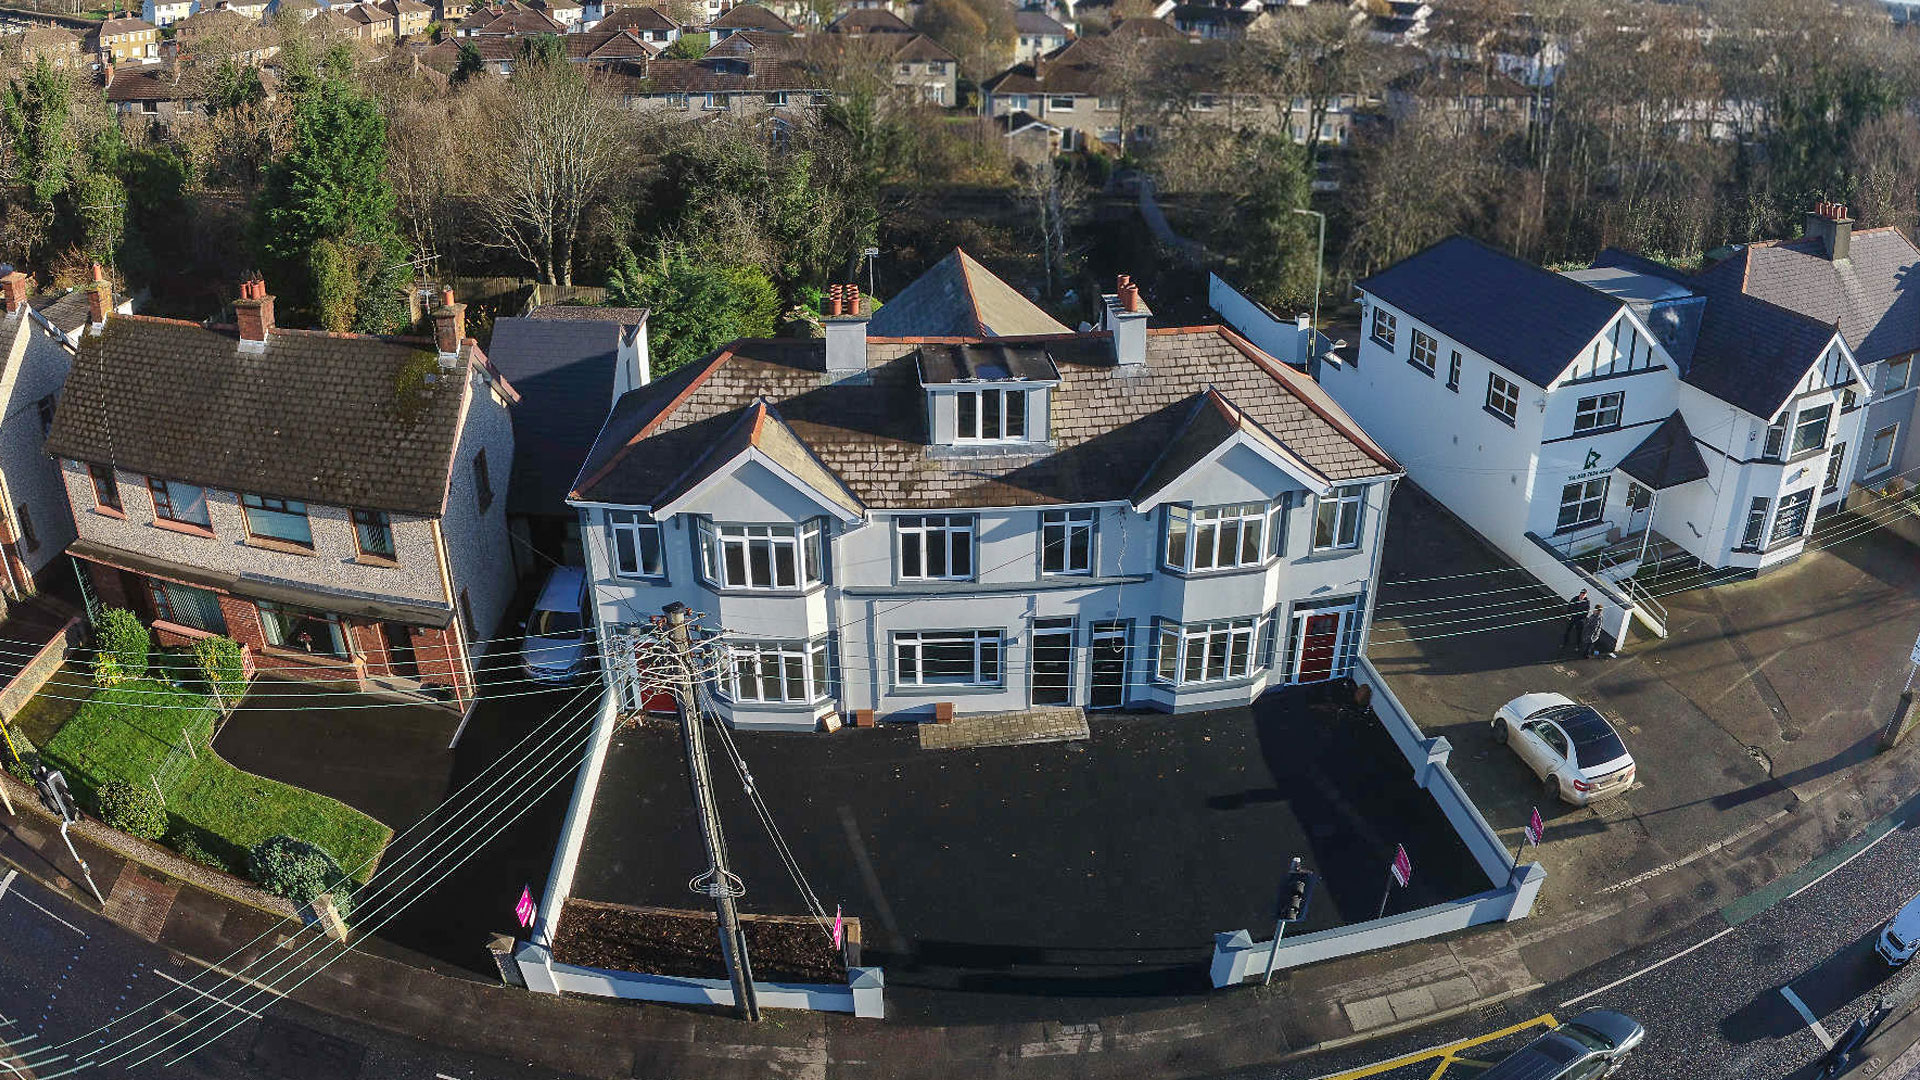 Homepage estate agents aerial drone premium services first slide